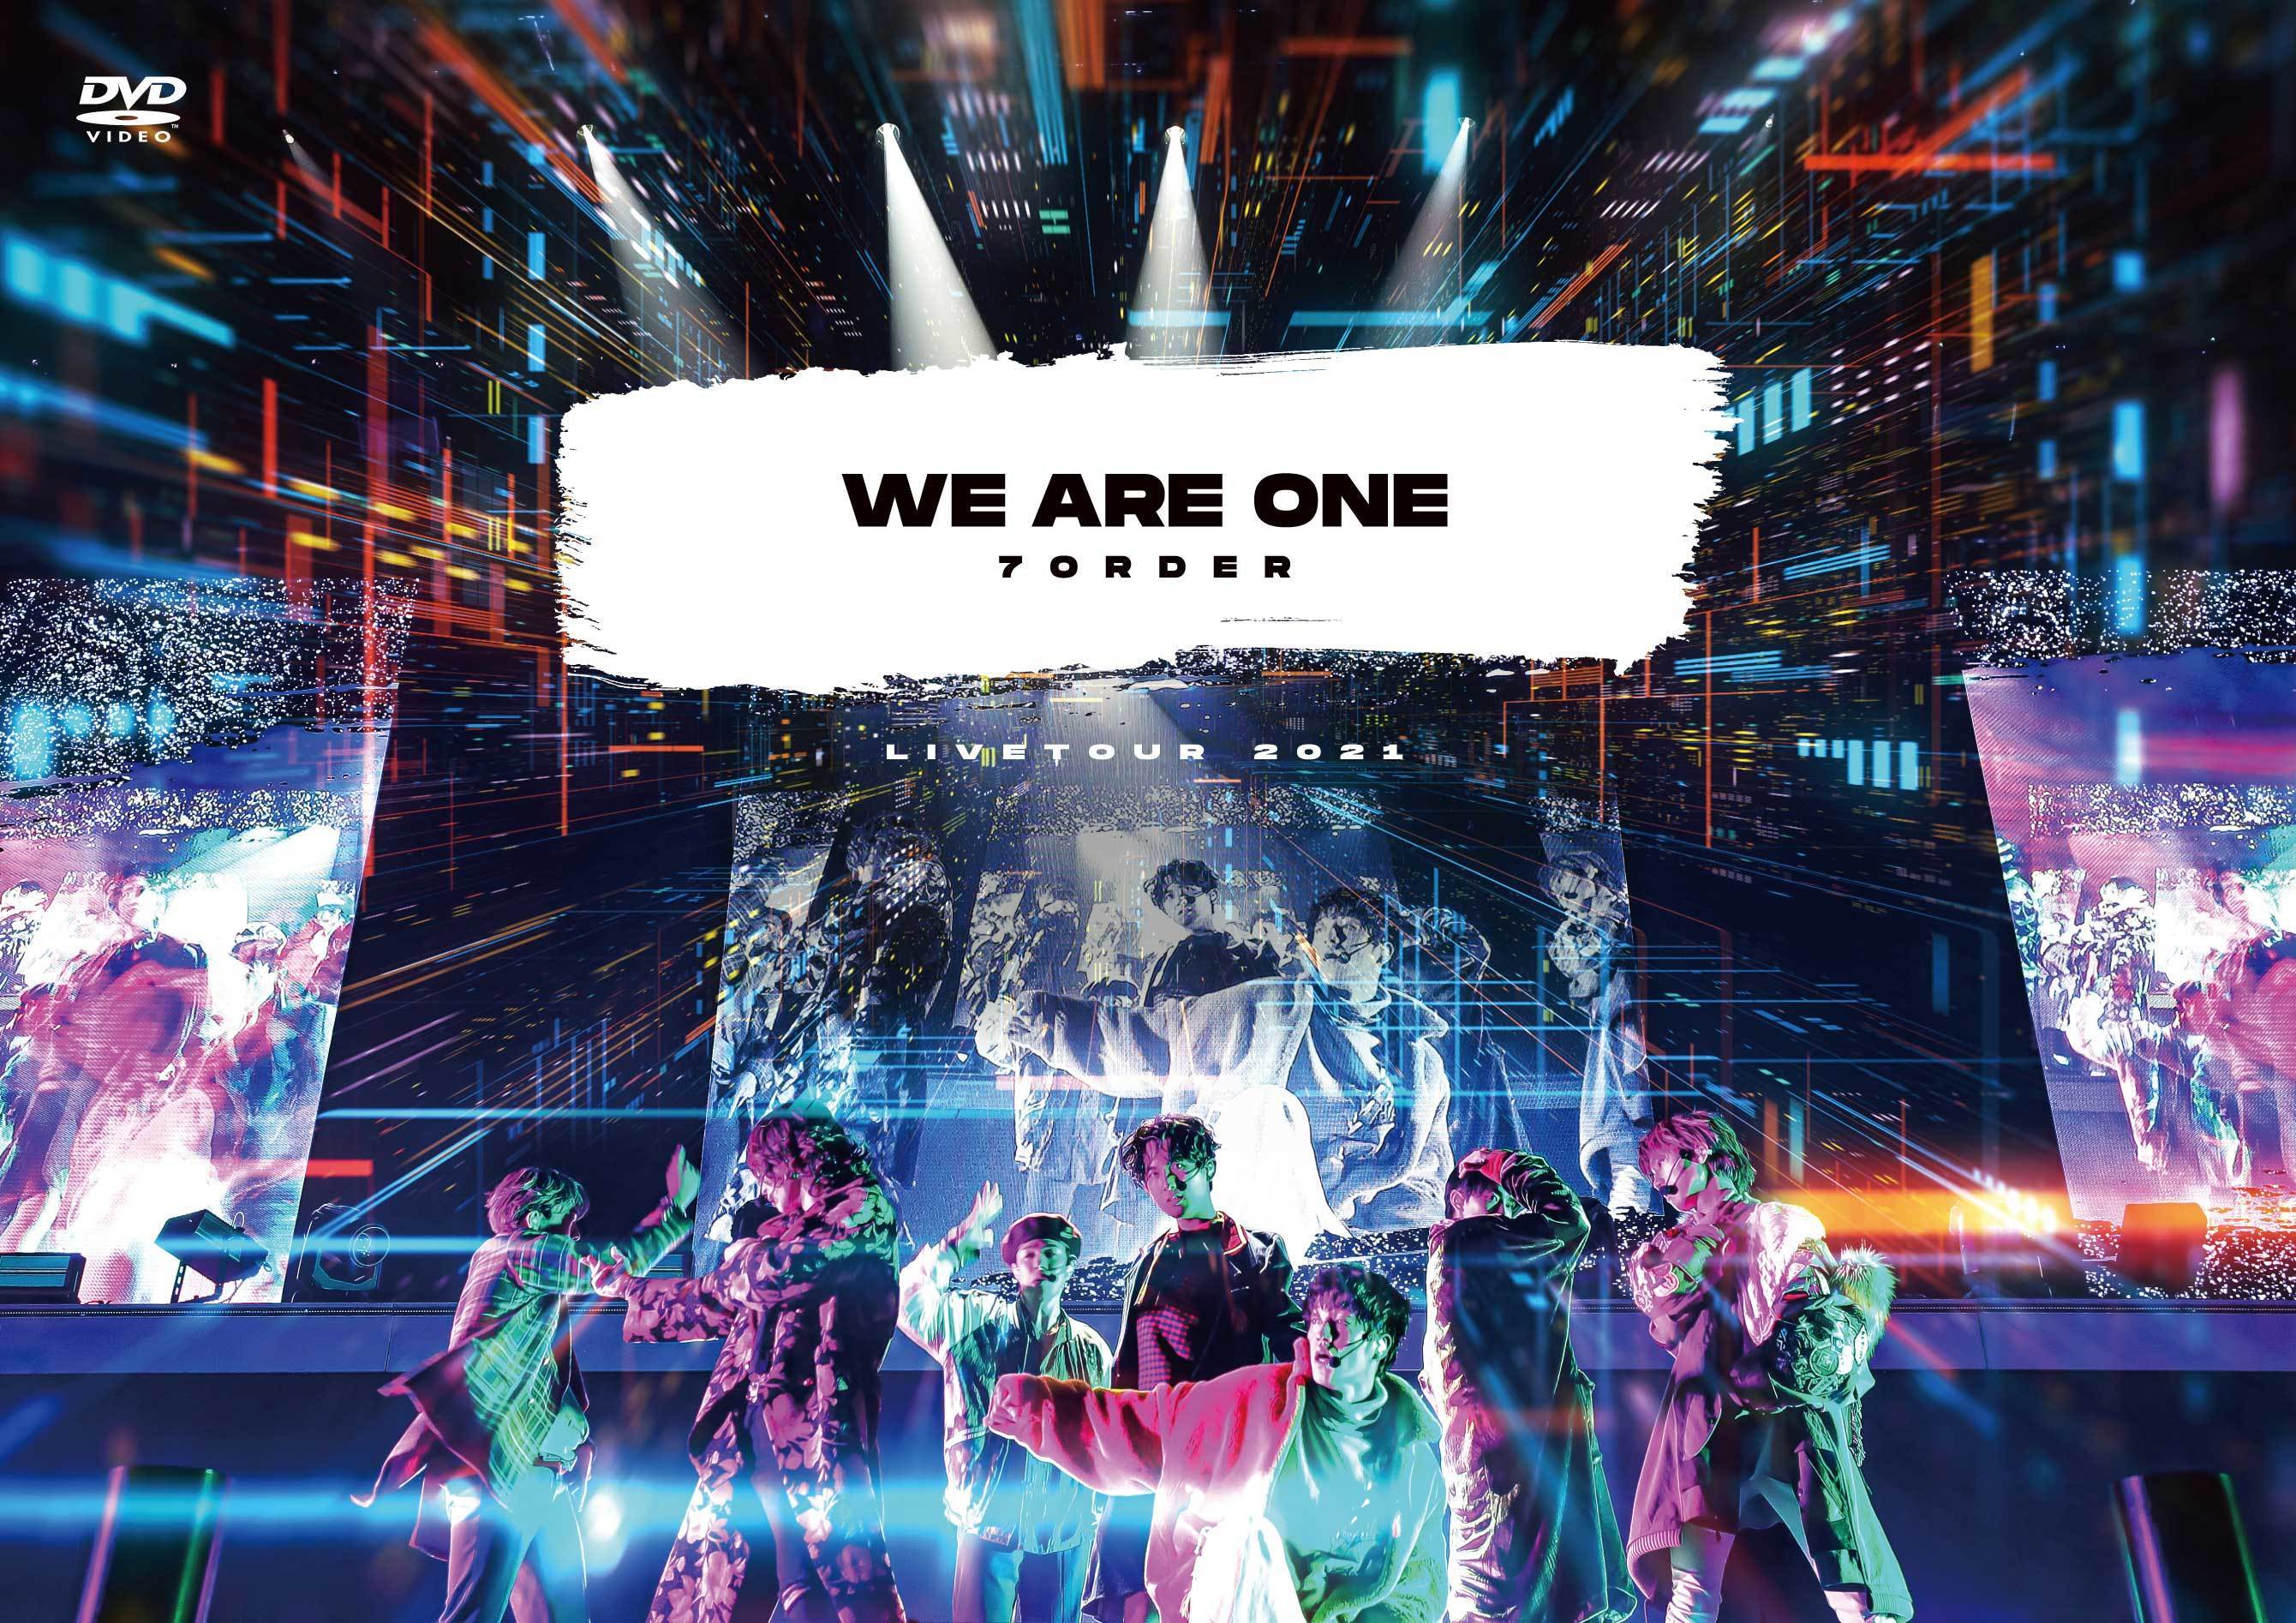 WE ARE ONE | 7ORDER project Official Site